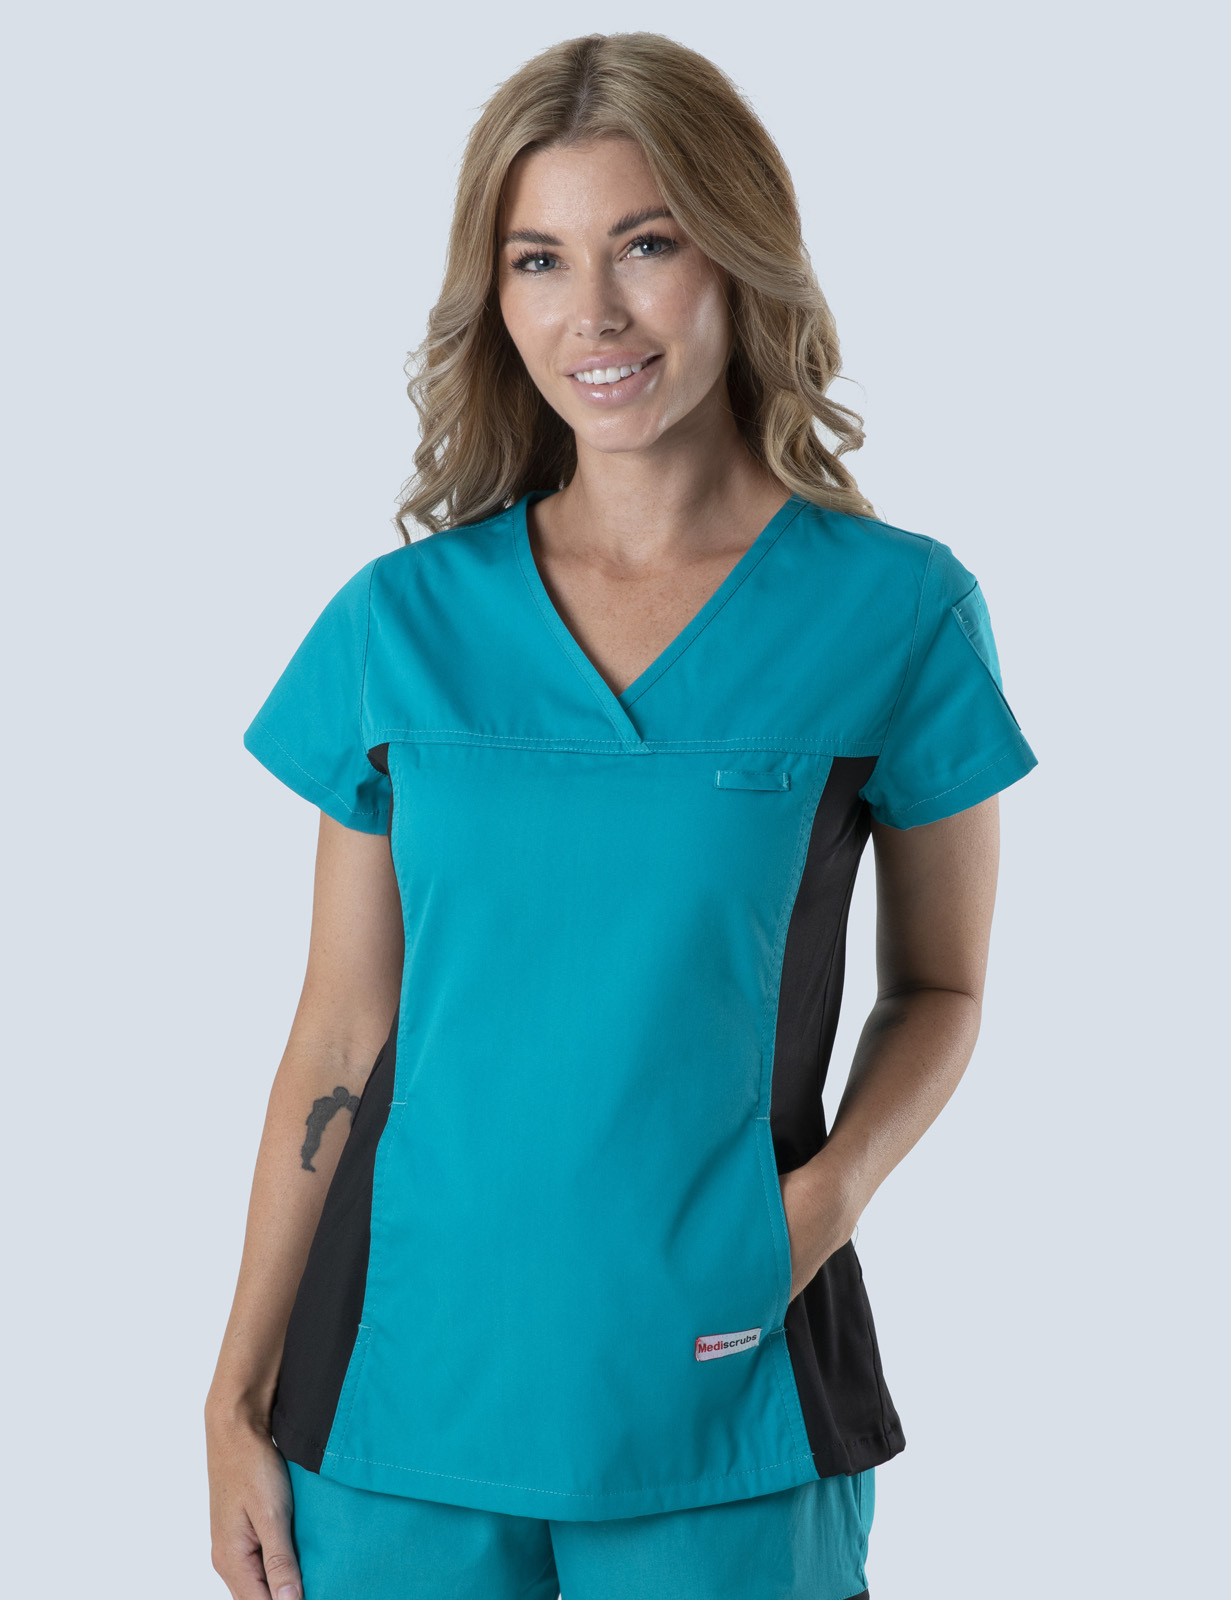 Ashmore Retreat Registered Nurse Top Only Bundle (Women's Fit Spandex in Teal incl Logo) 